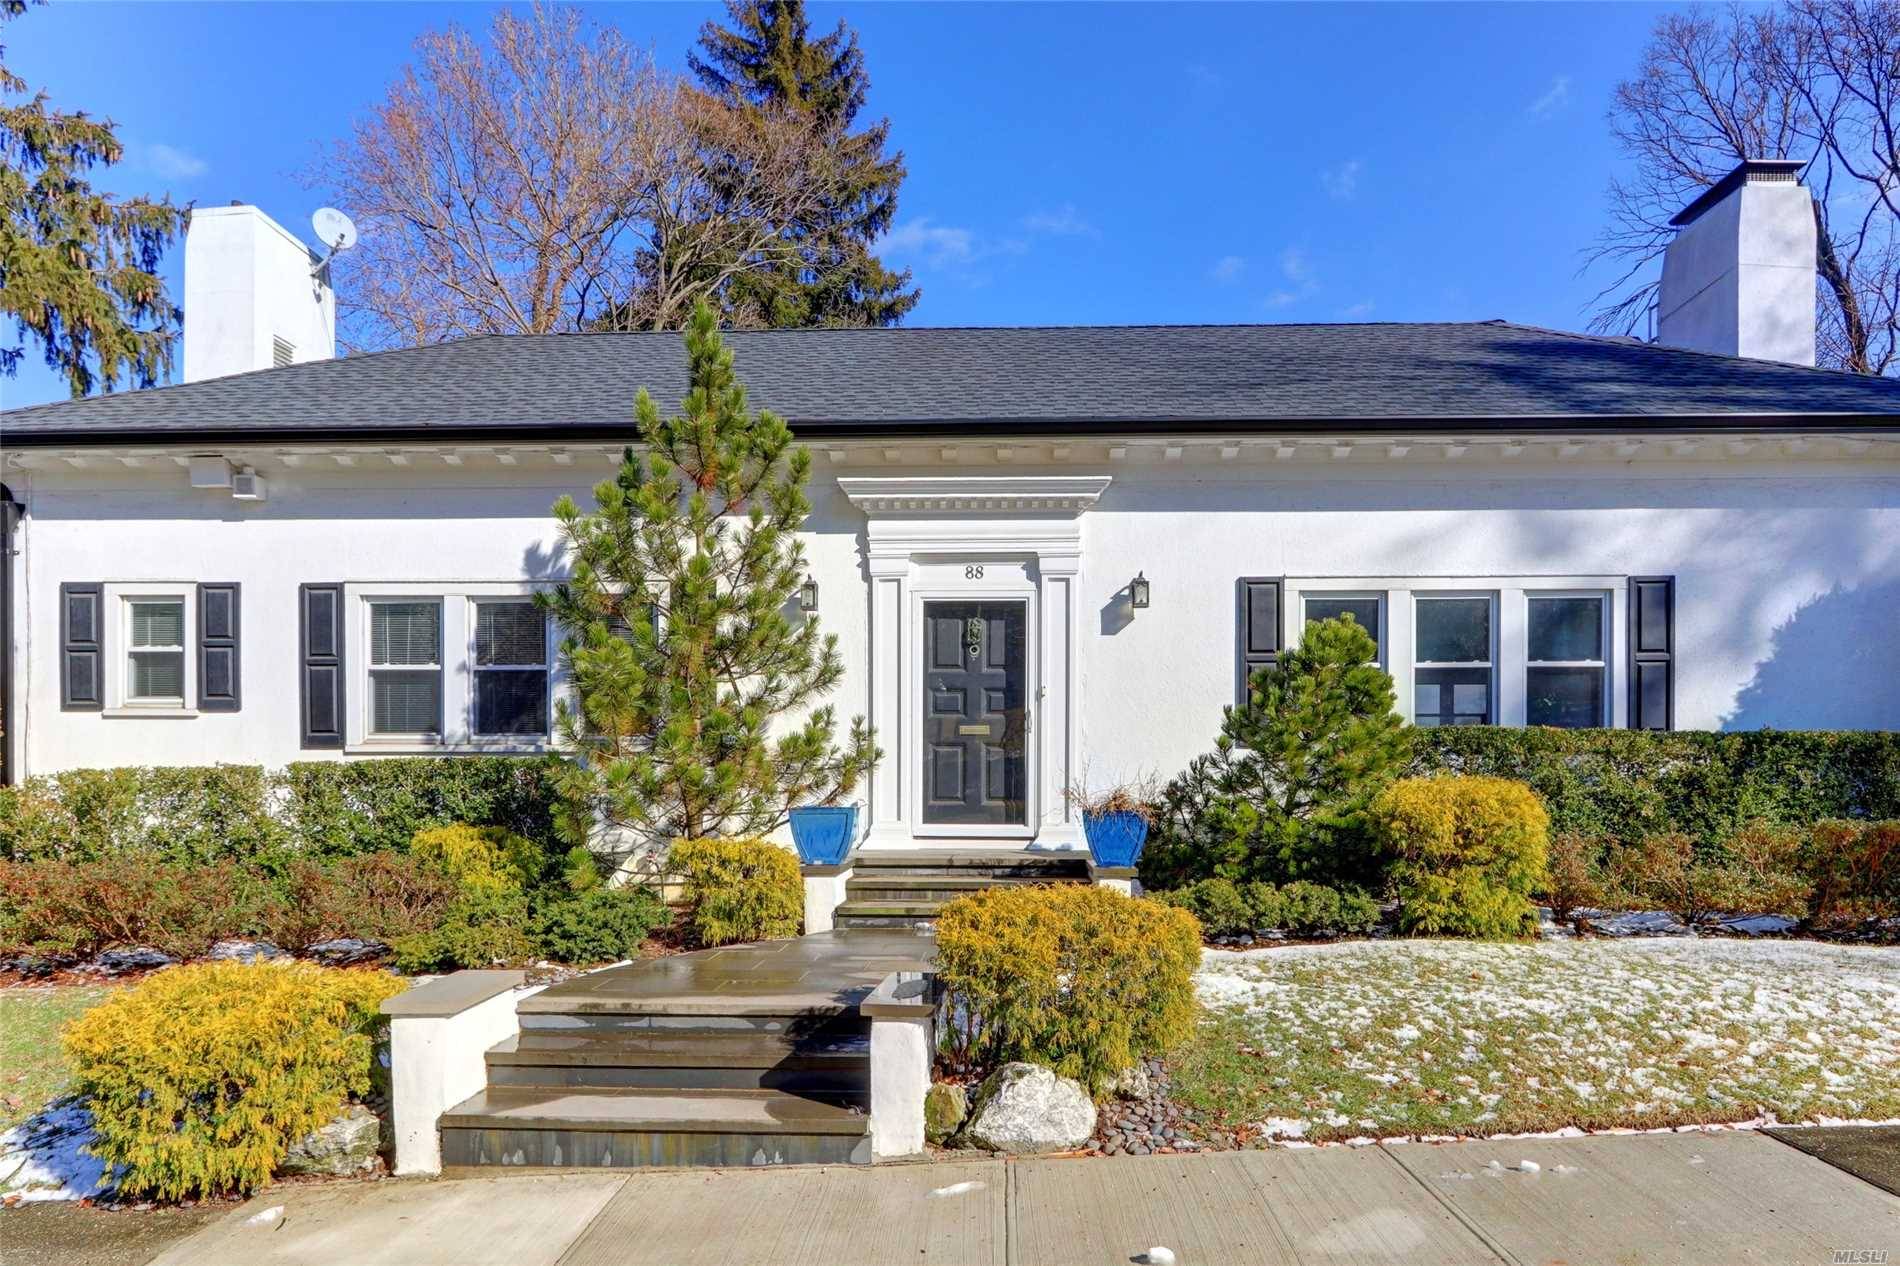 Totally Renovated Designer Showcase 4200 Sf Colonial Home, Proudly Sitting Atop A Hill Overlooking Picturesque Open Landscape View Of Your Own Private Putting Green, Lit Paved Porches, Patios Arched Sun ...